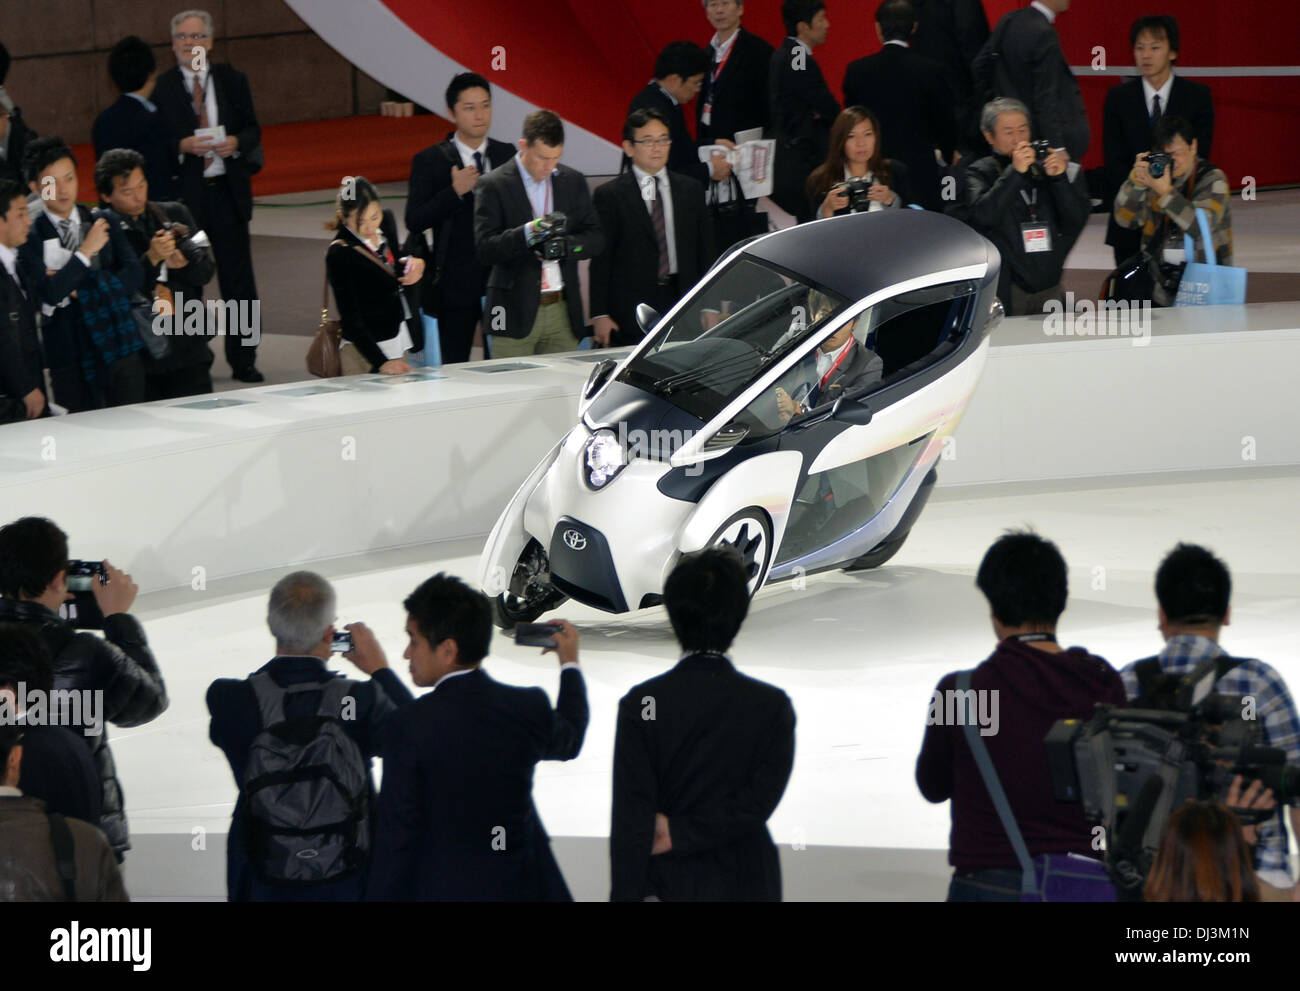 Tokyo, Japan. 20th Nov, 2013. Toyota Motor Corp., demonstrates its i-Road, an electric trike, during the Tokyo Motor Show on Wednesday, November 20, 2013. The biennial event showcases Japanese automakers' latest electronic technology and eco-friendly cars aimed at the growing low-emissions sector. Credit:  Natsuki Sakai/AFLO/Alamy Live News Stock Photo